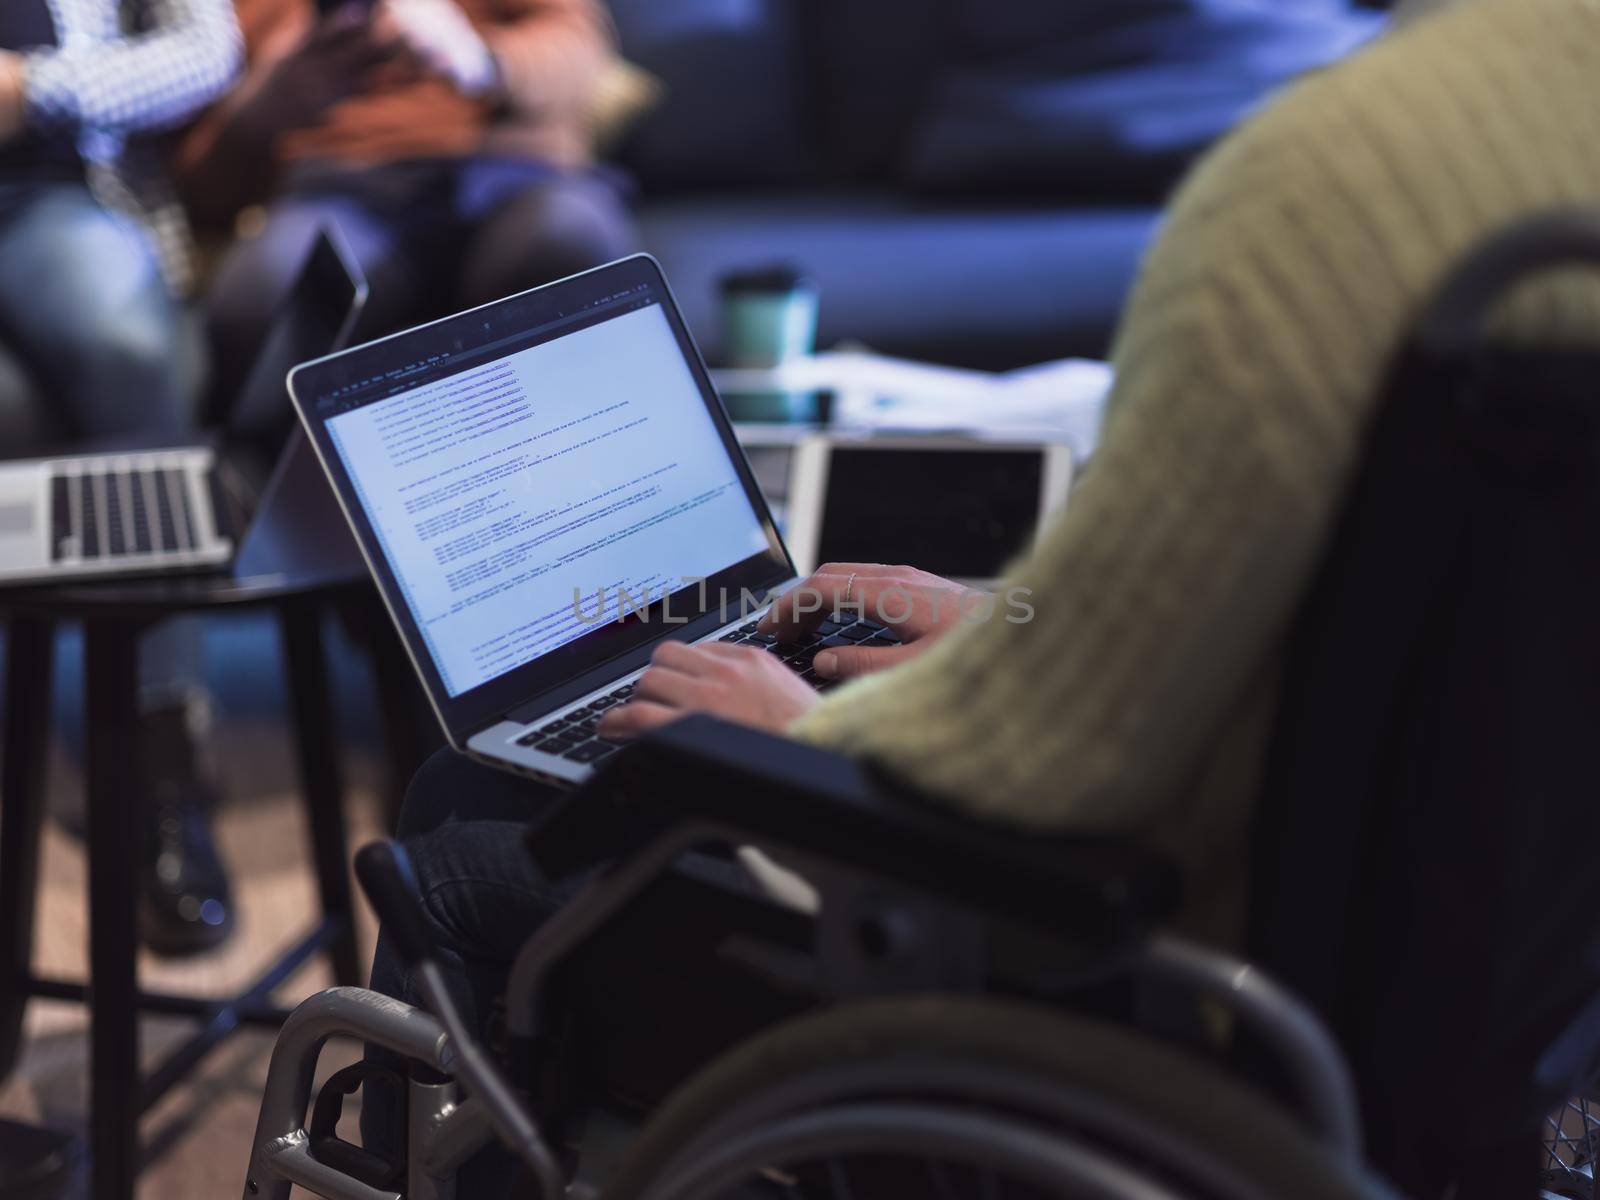 Closeup of a woman in a wheelchair working on a laptop computer at the office. Concept inclusion of disabled people in business. Business team meeting in background. High quality photo